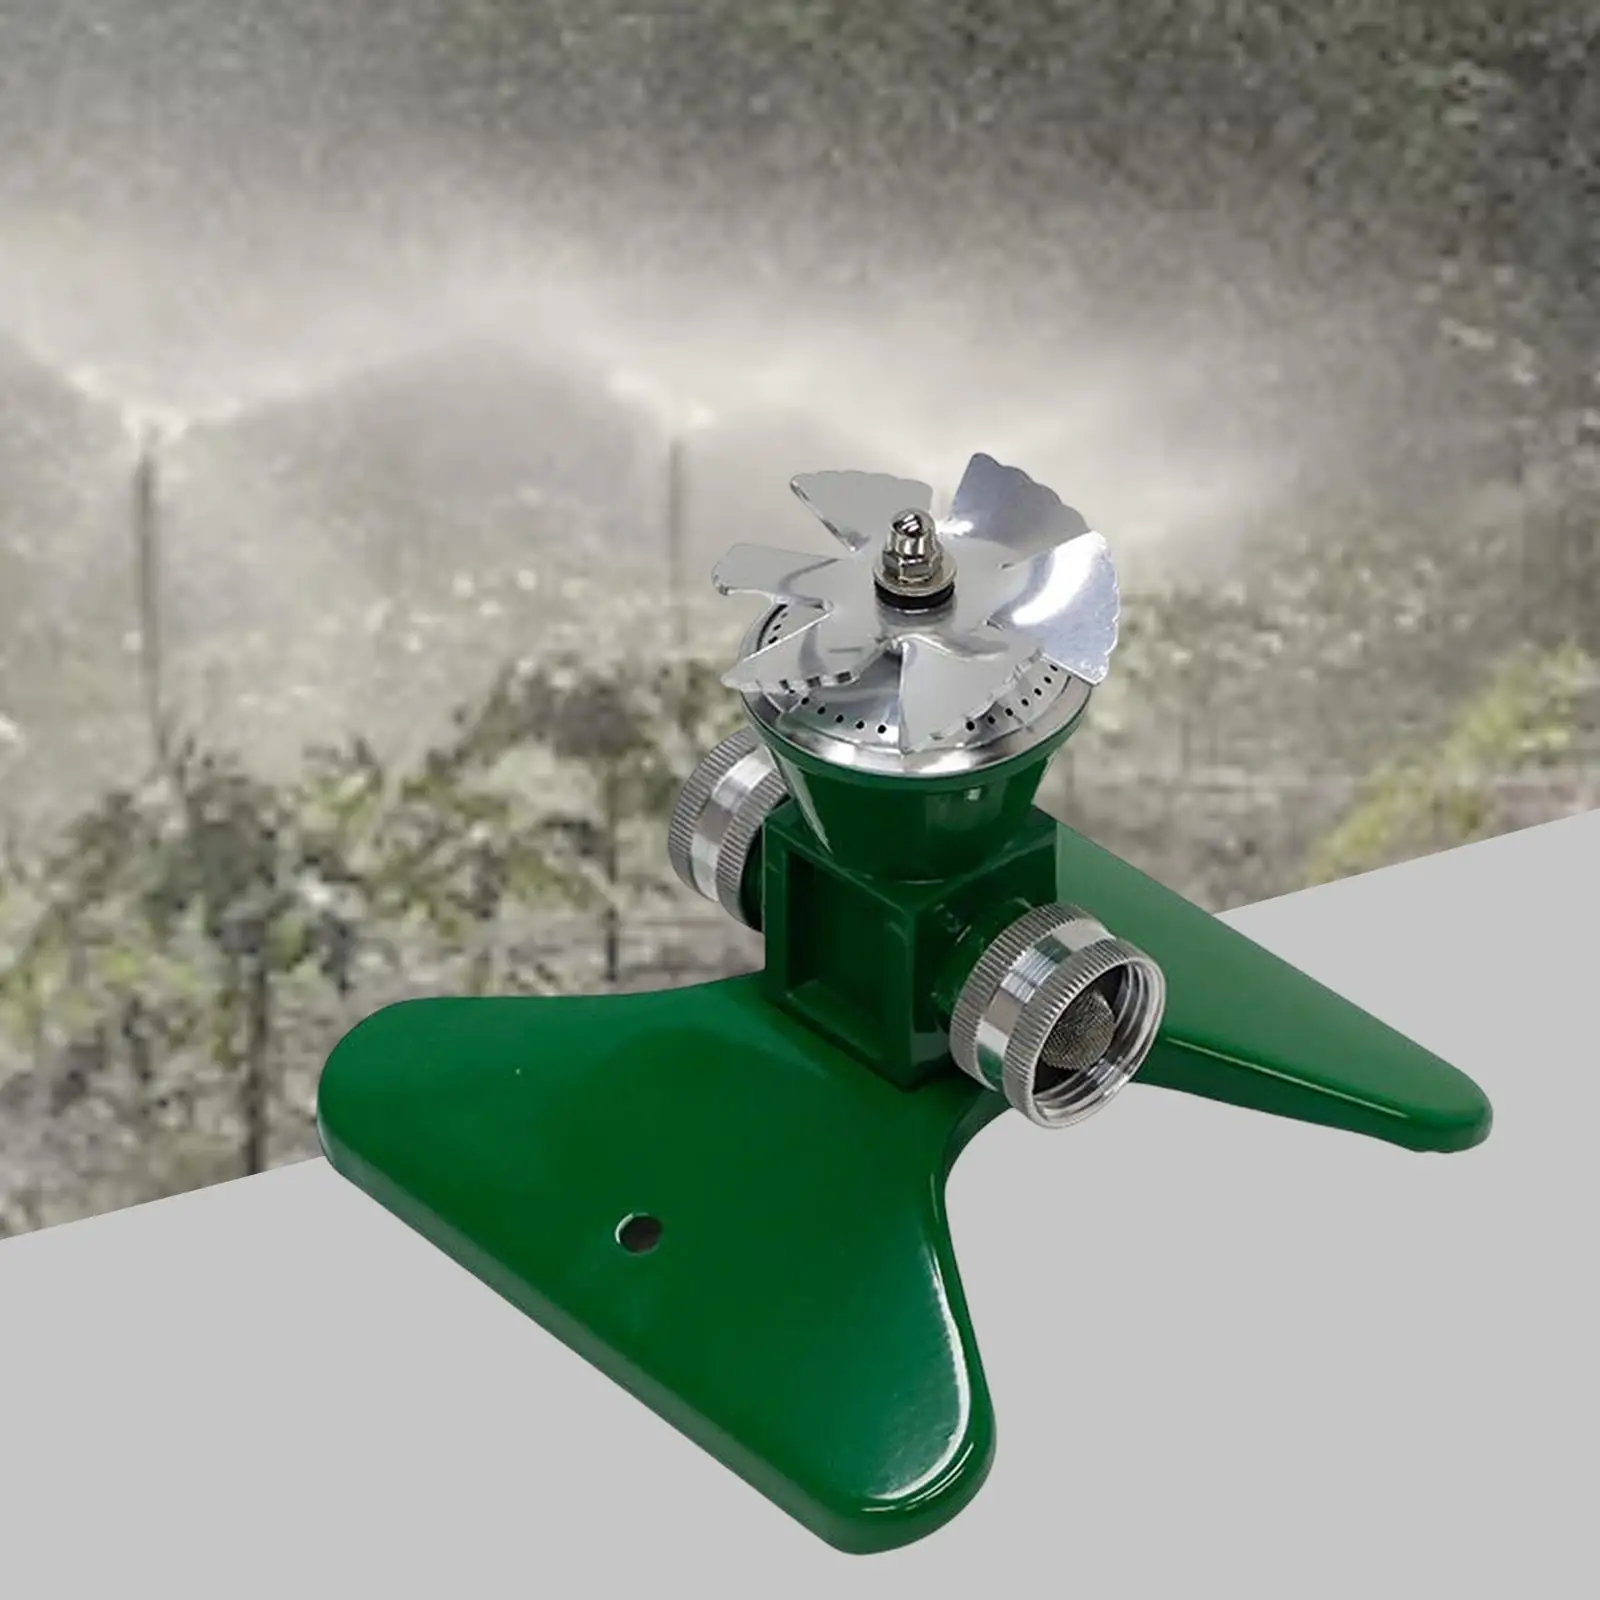 360 Rotating Lawn Sprinkler Leakproof with Base Automatic Nozzle Sprayer Rotary Sprinkler for Watering Cleaning yard Lawn